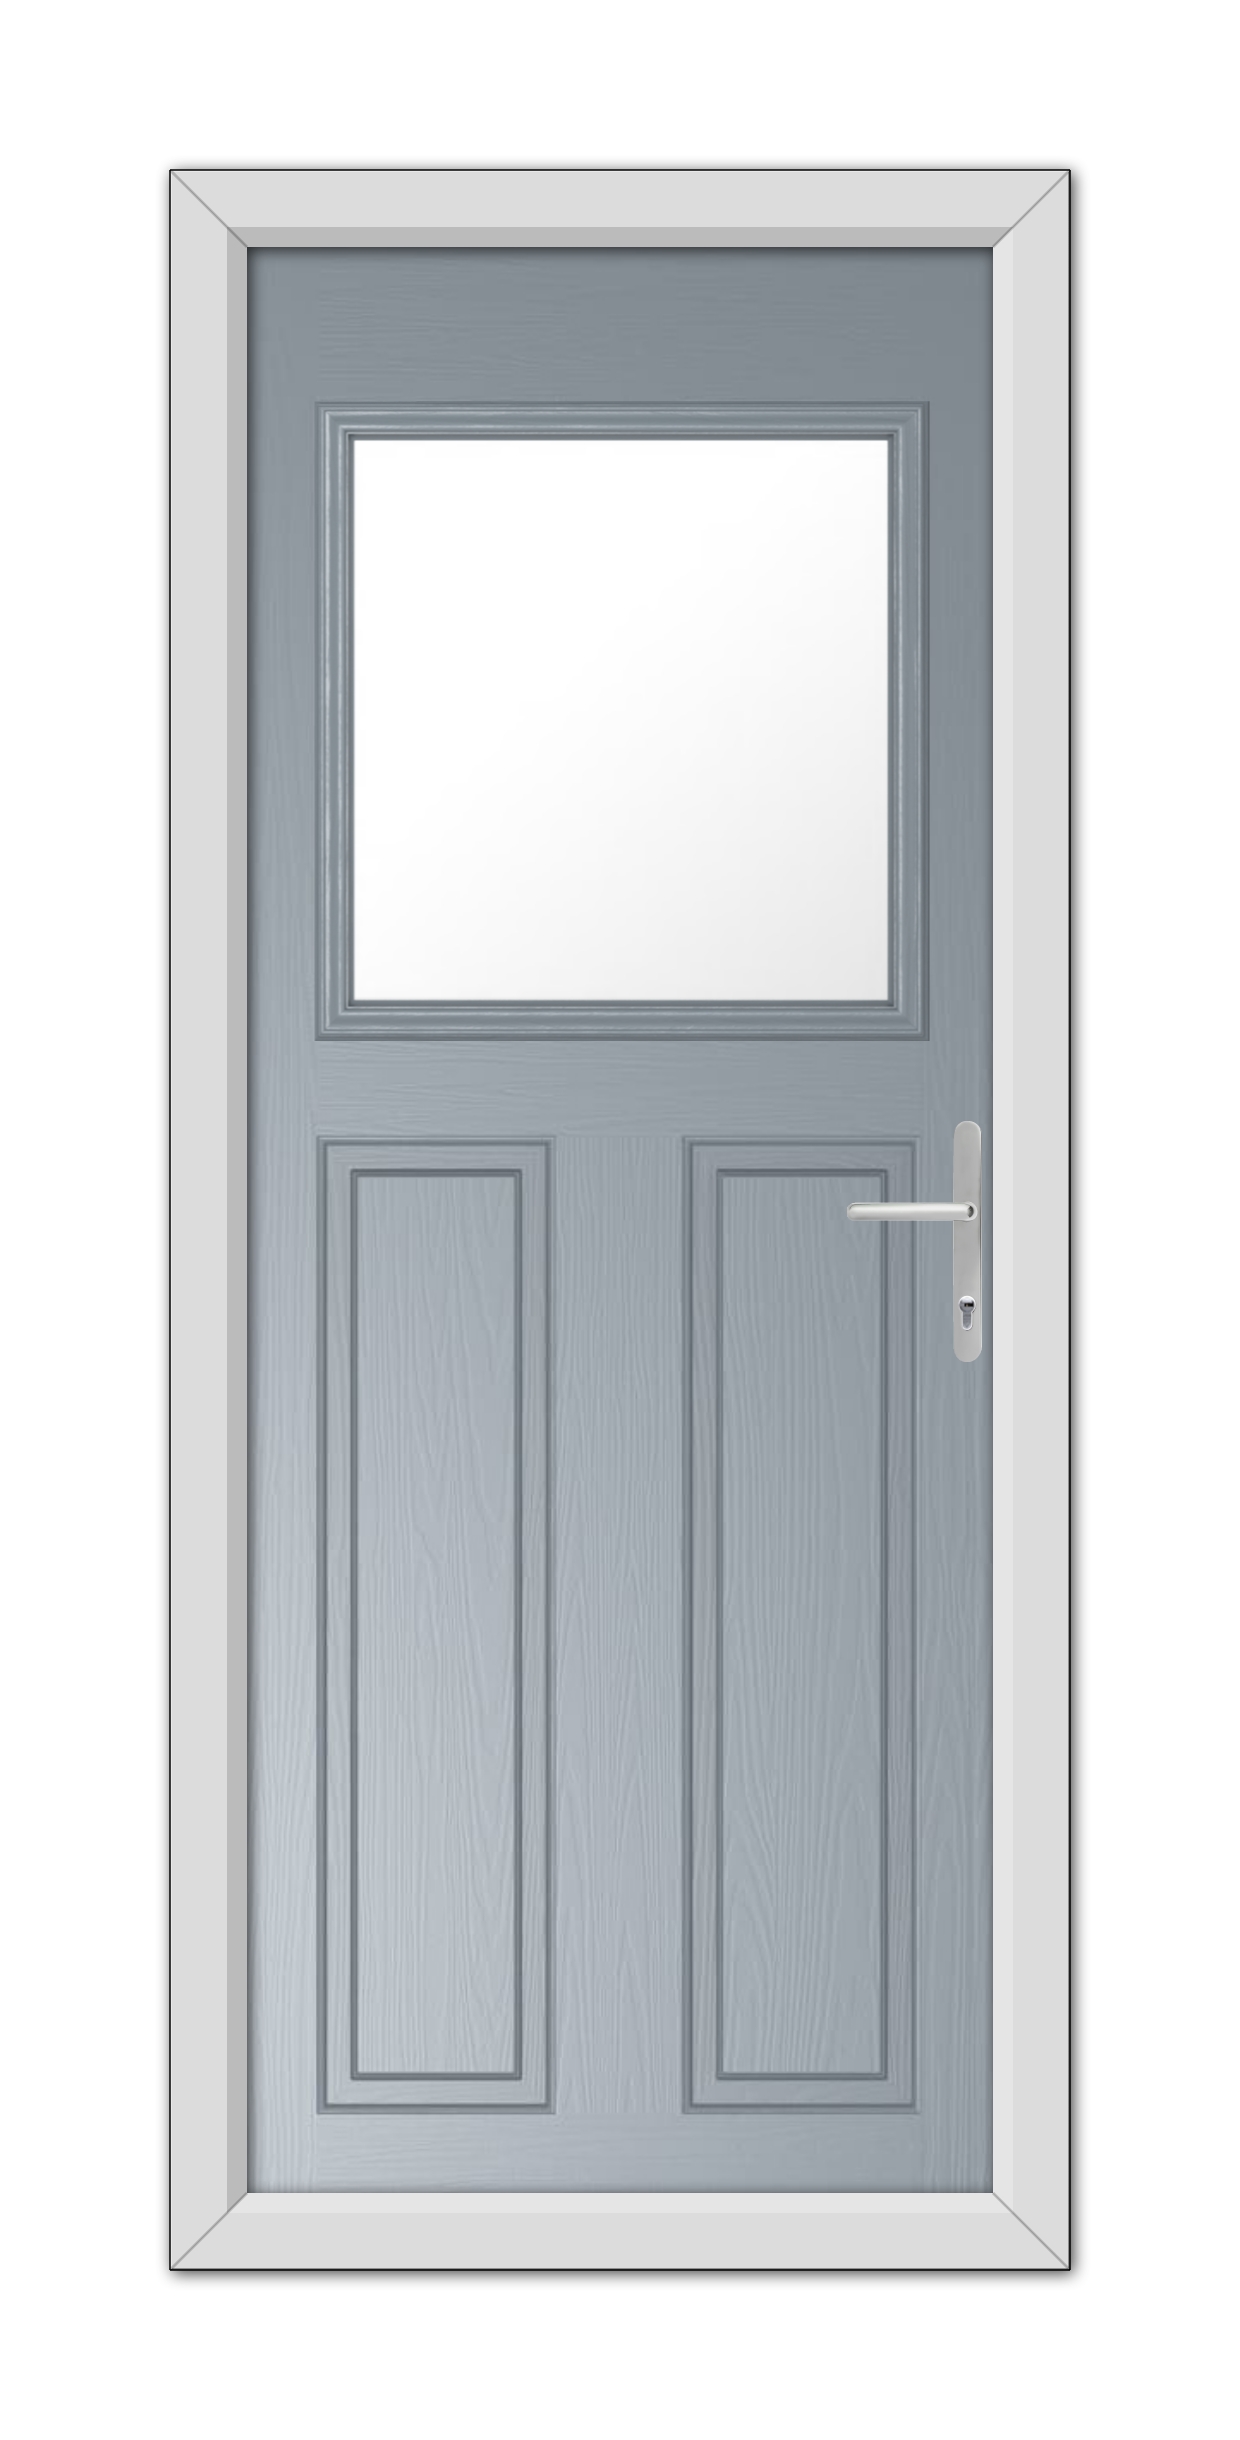 A modern French Grey Axwell Composite Door 48mm Timber Core featuring a top window and a metal handle, set within a white frame, isolated on a white background.